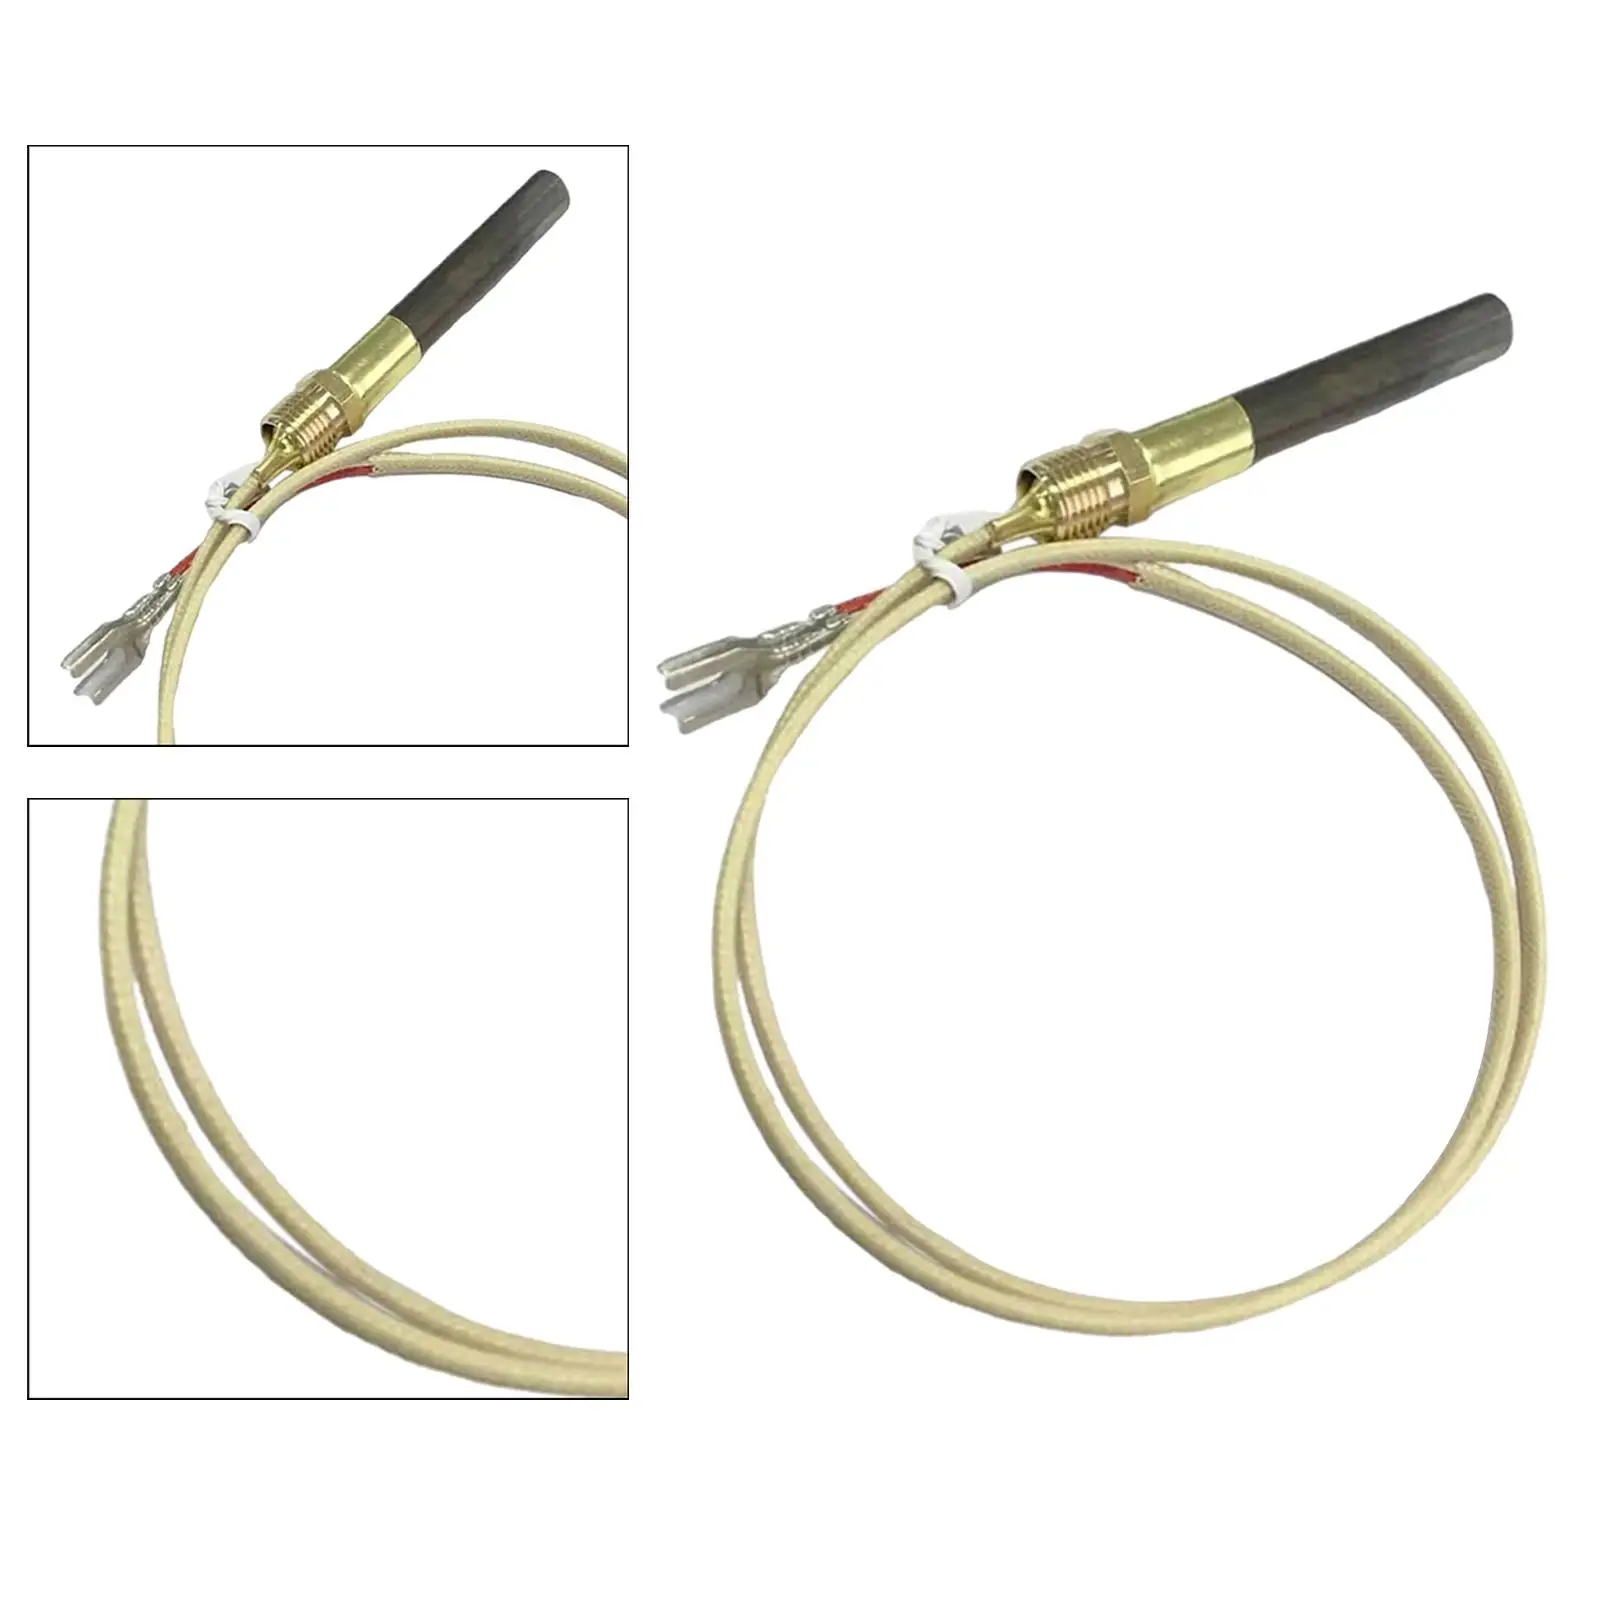 Fireplace Thermopile Replacement Thermopile Generators Professional Temperature Resistance for Oven Heater Replacement Parts